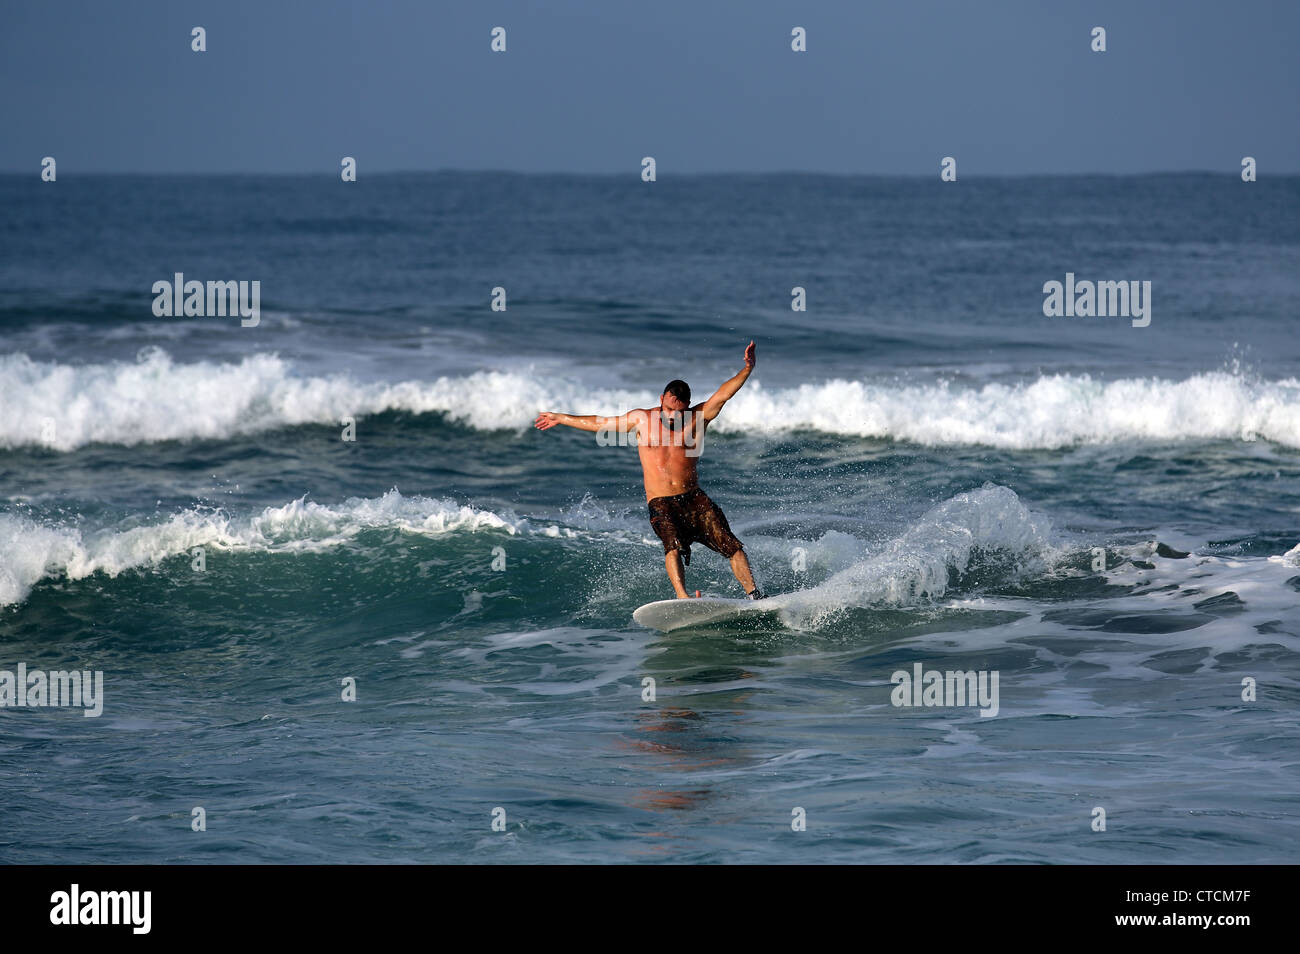 Bearded man surfing a wave in Sumatra, Indonesia. Stock Photo